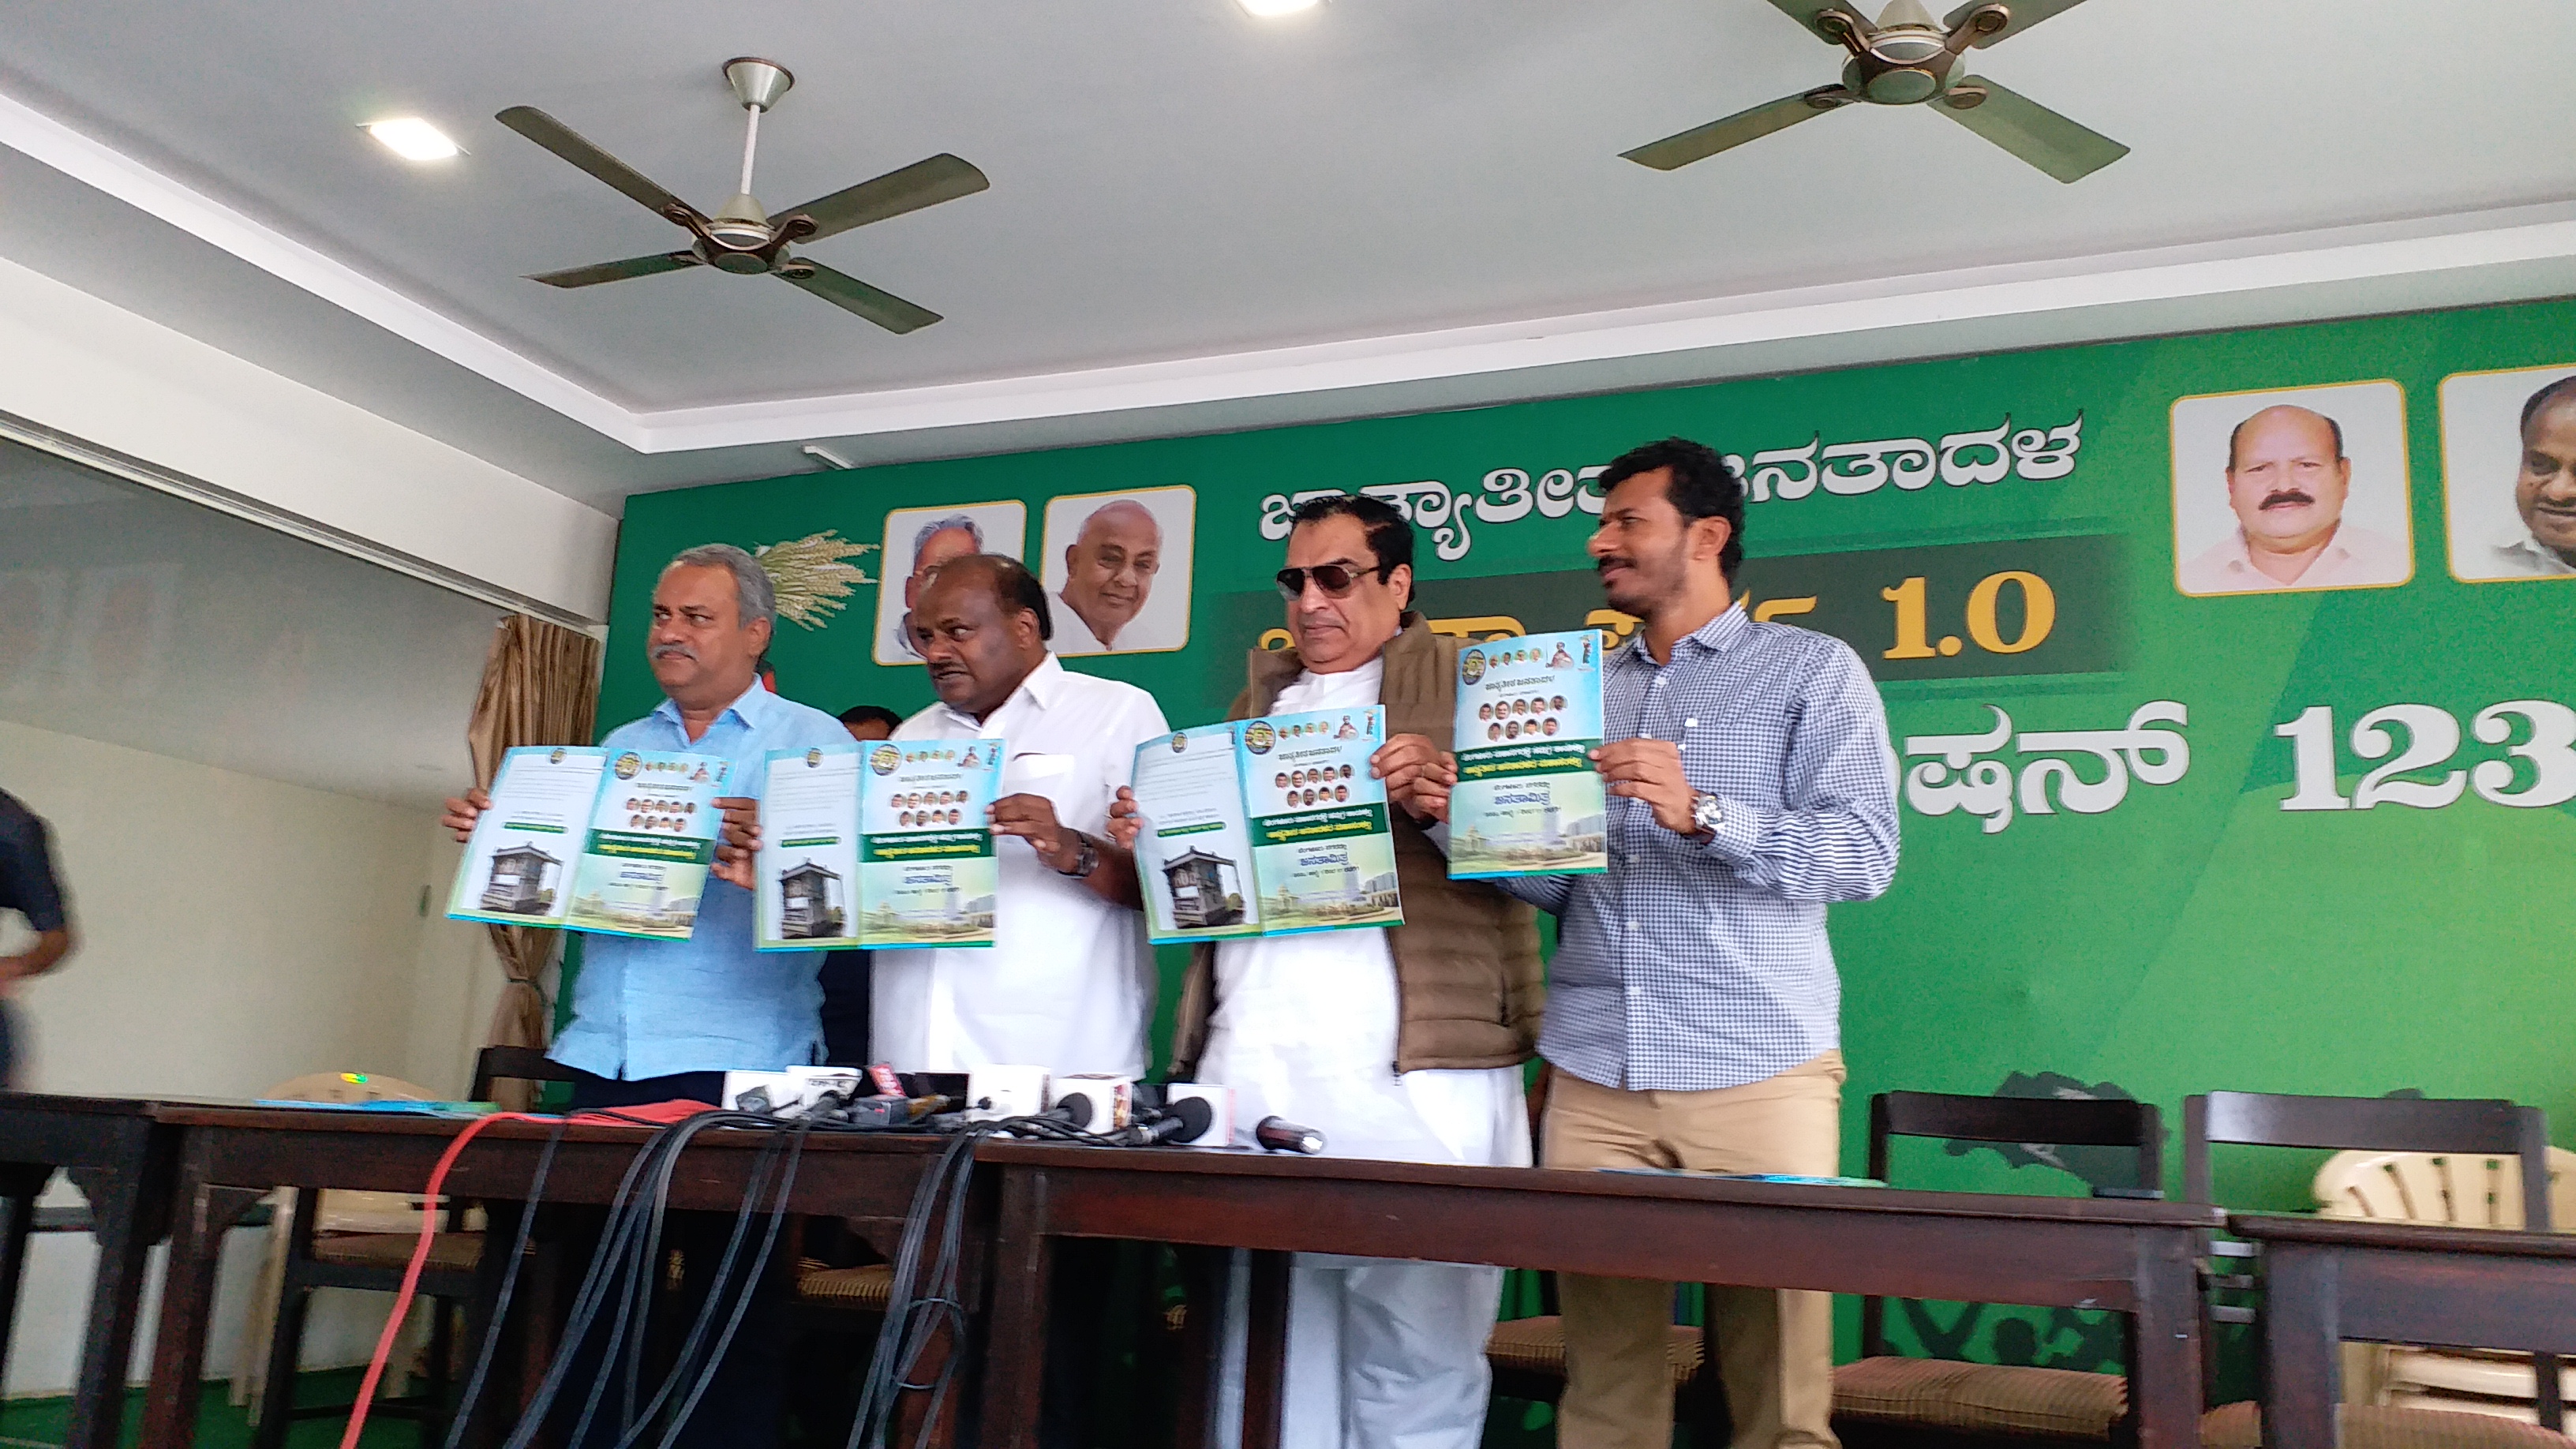 jds-win-more-seats-in-2023-election-says-former-minister-kumaraswami